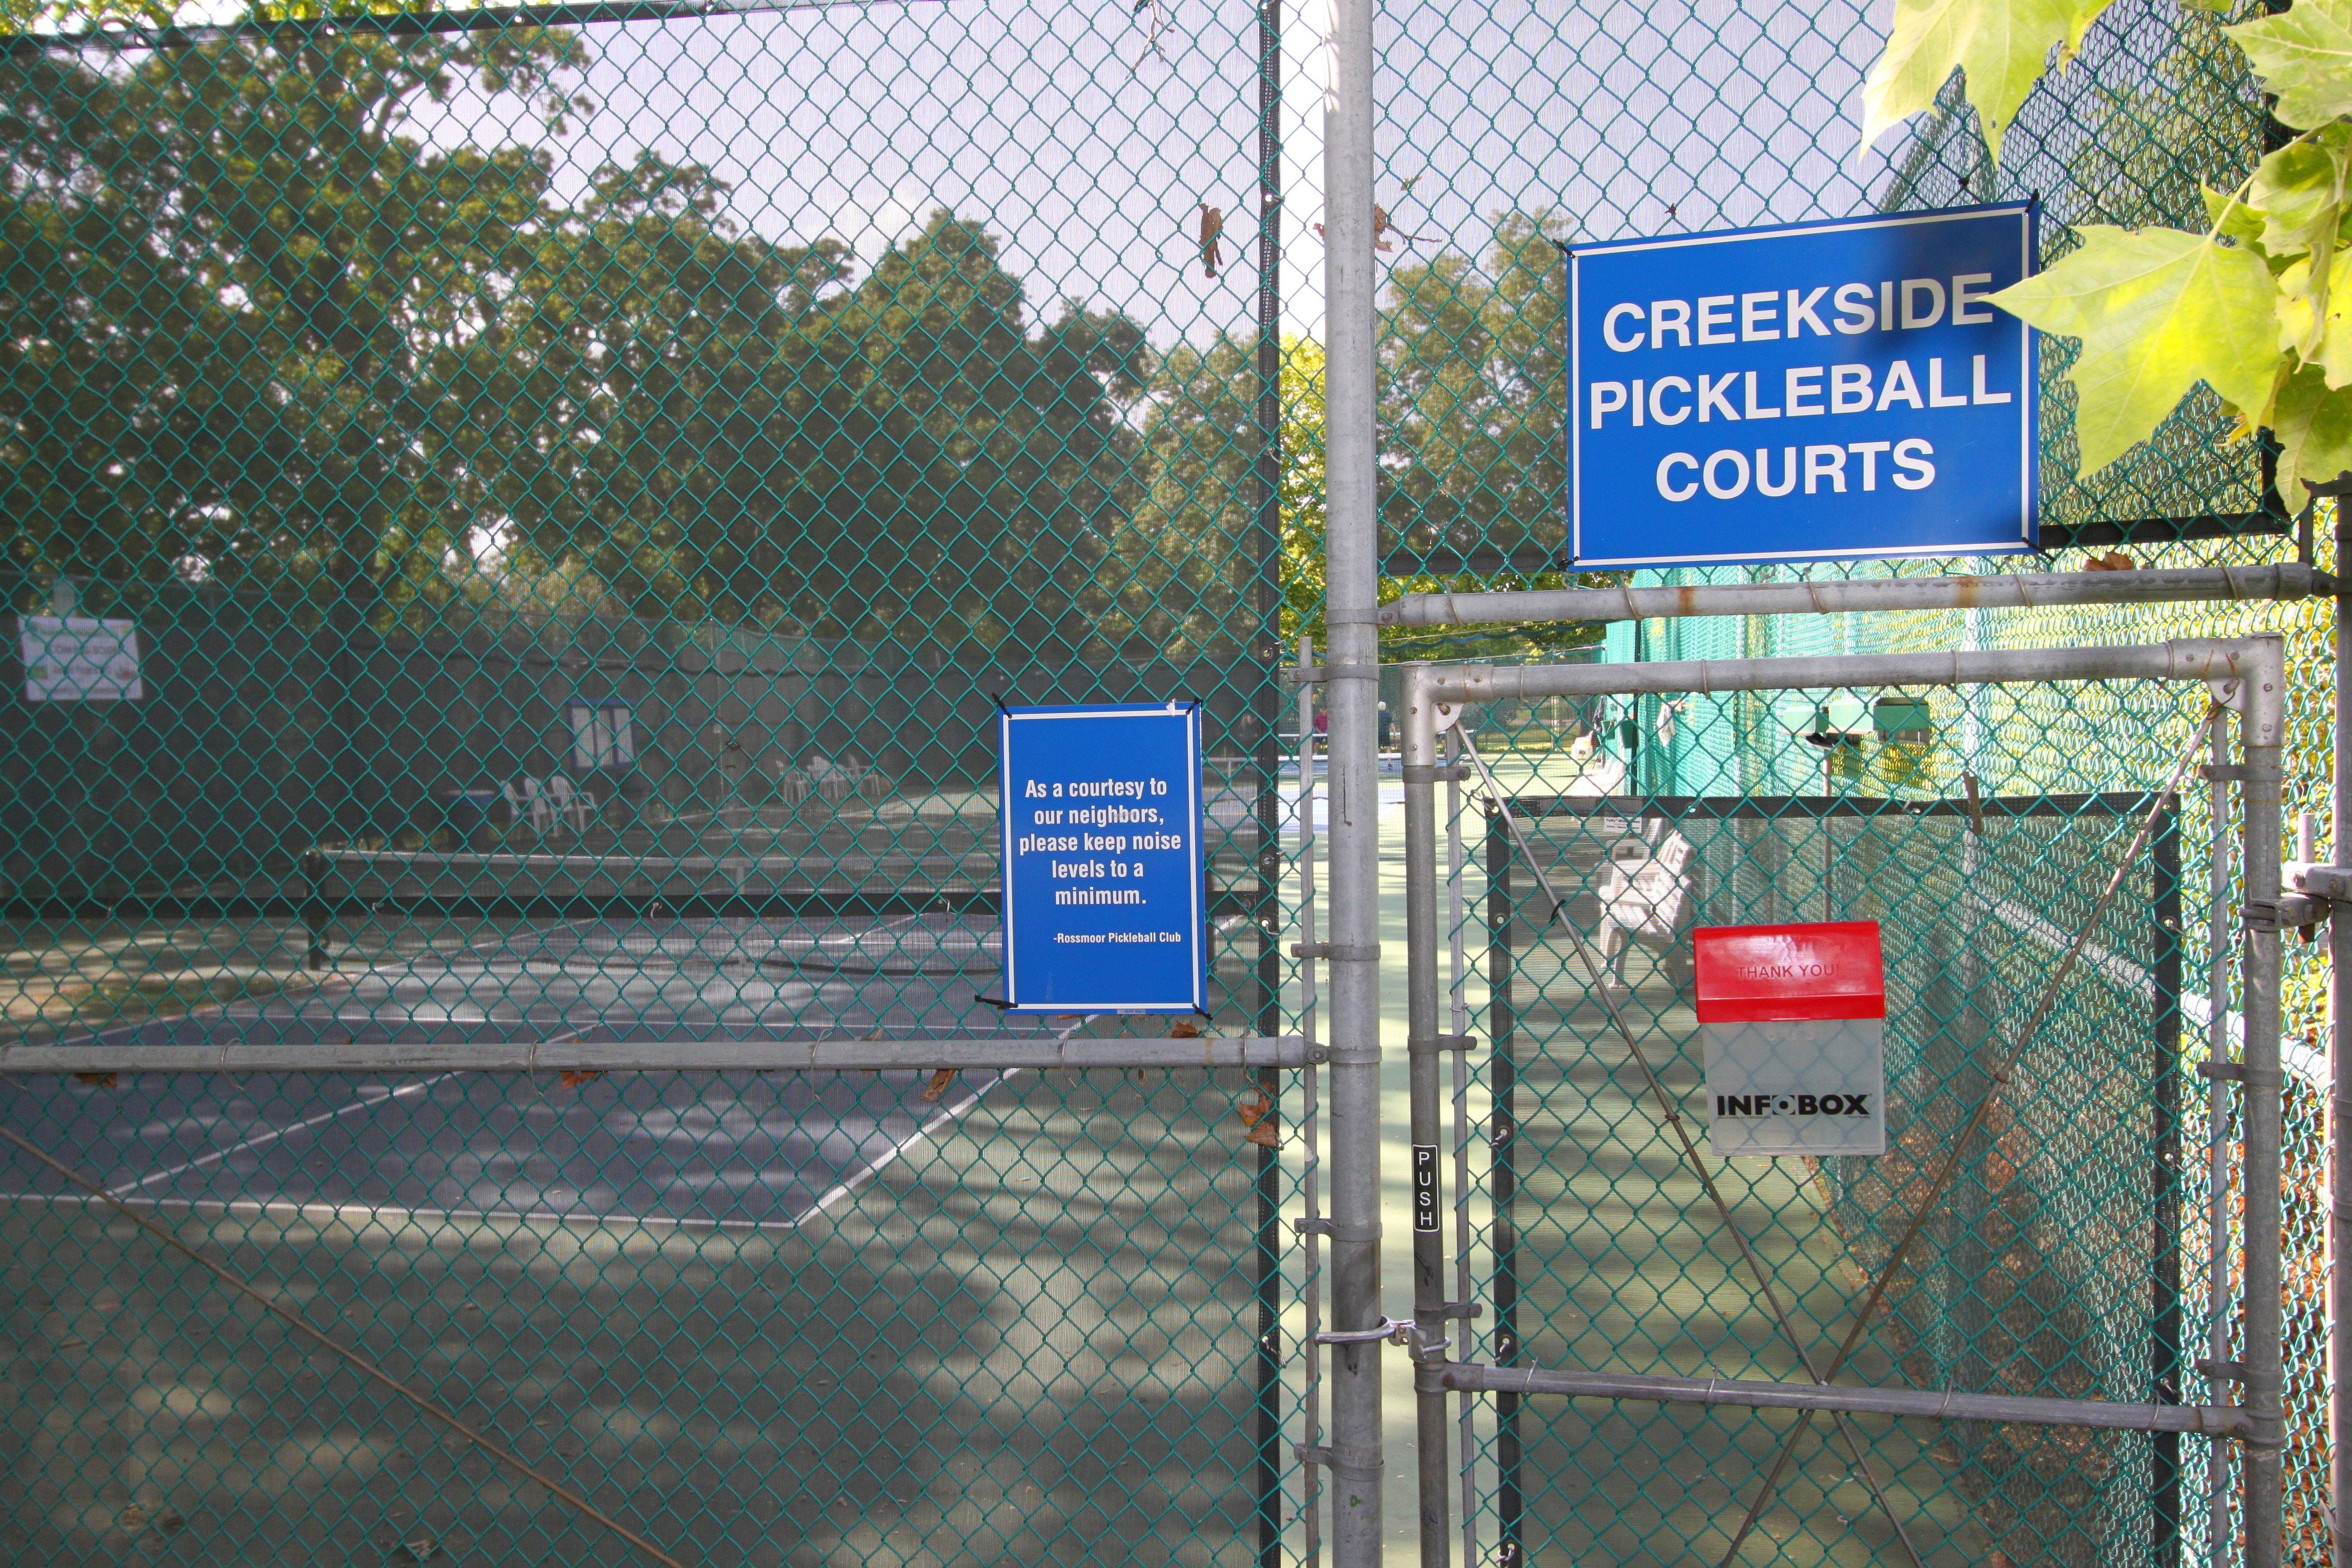 Creekside Pickleball Courts